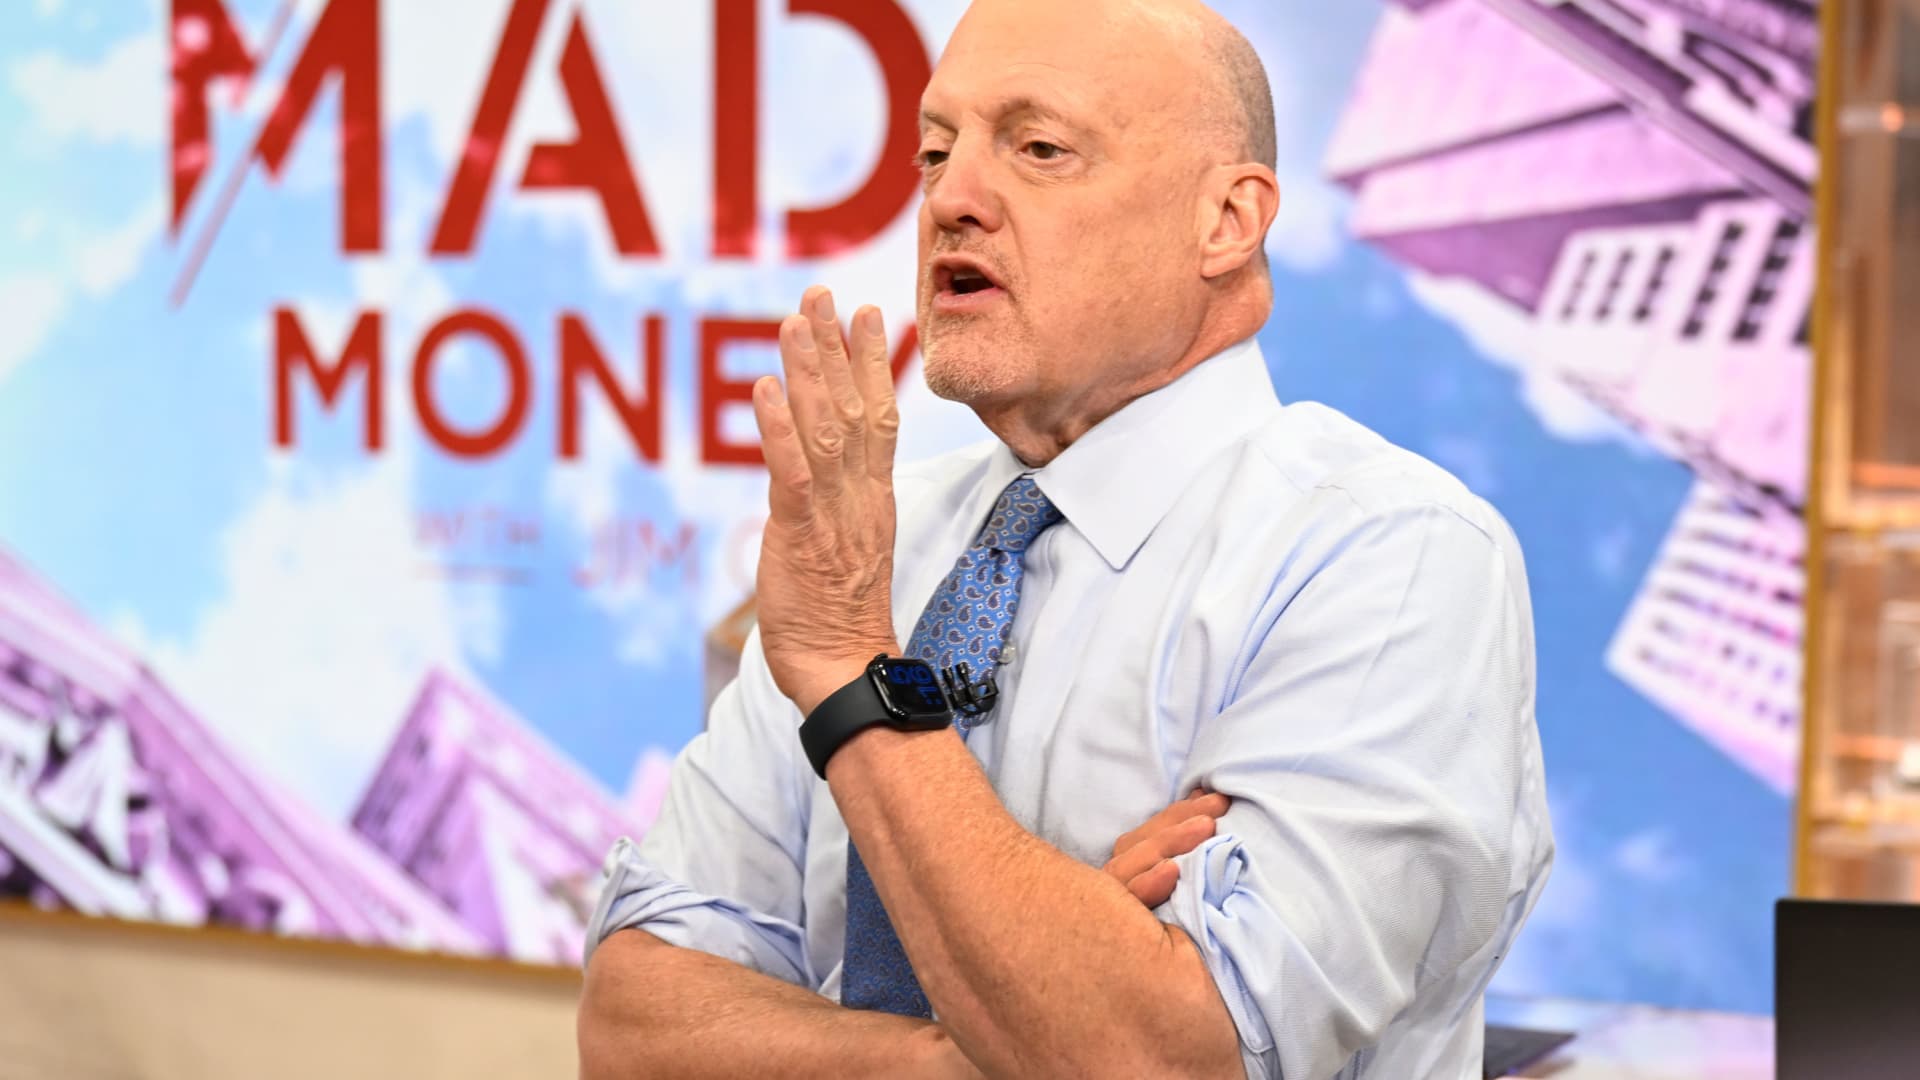 Jim Cramer wasn’t selling stocks in Tuesday’s wreckage. Here’s why